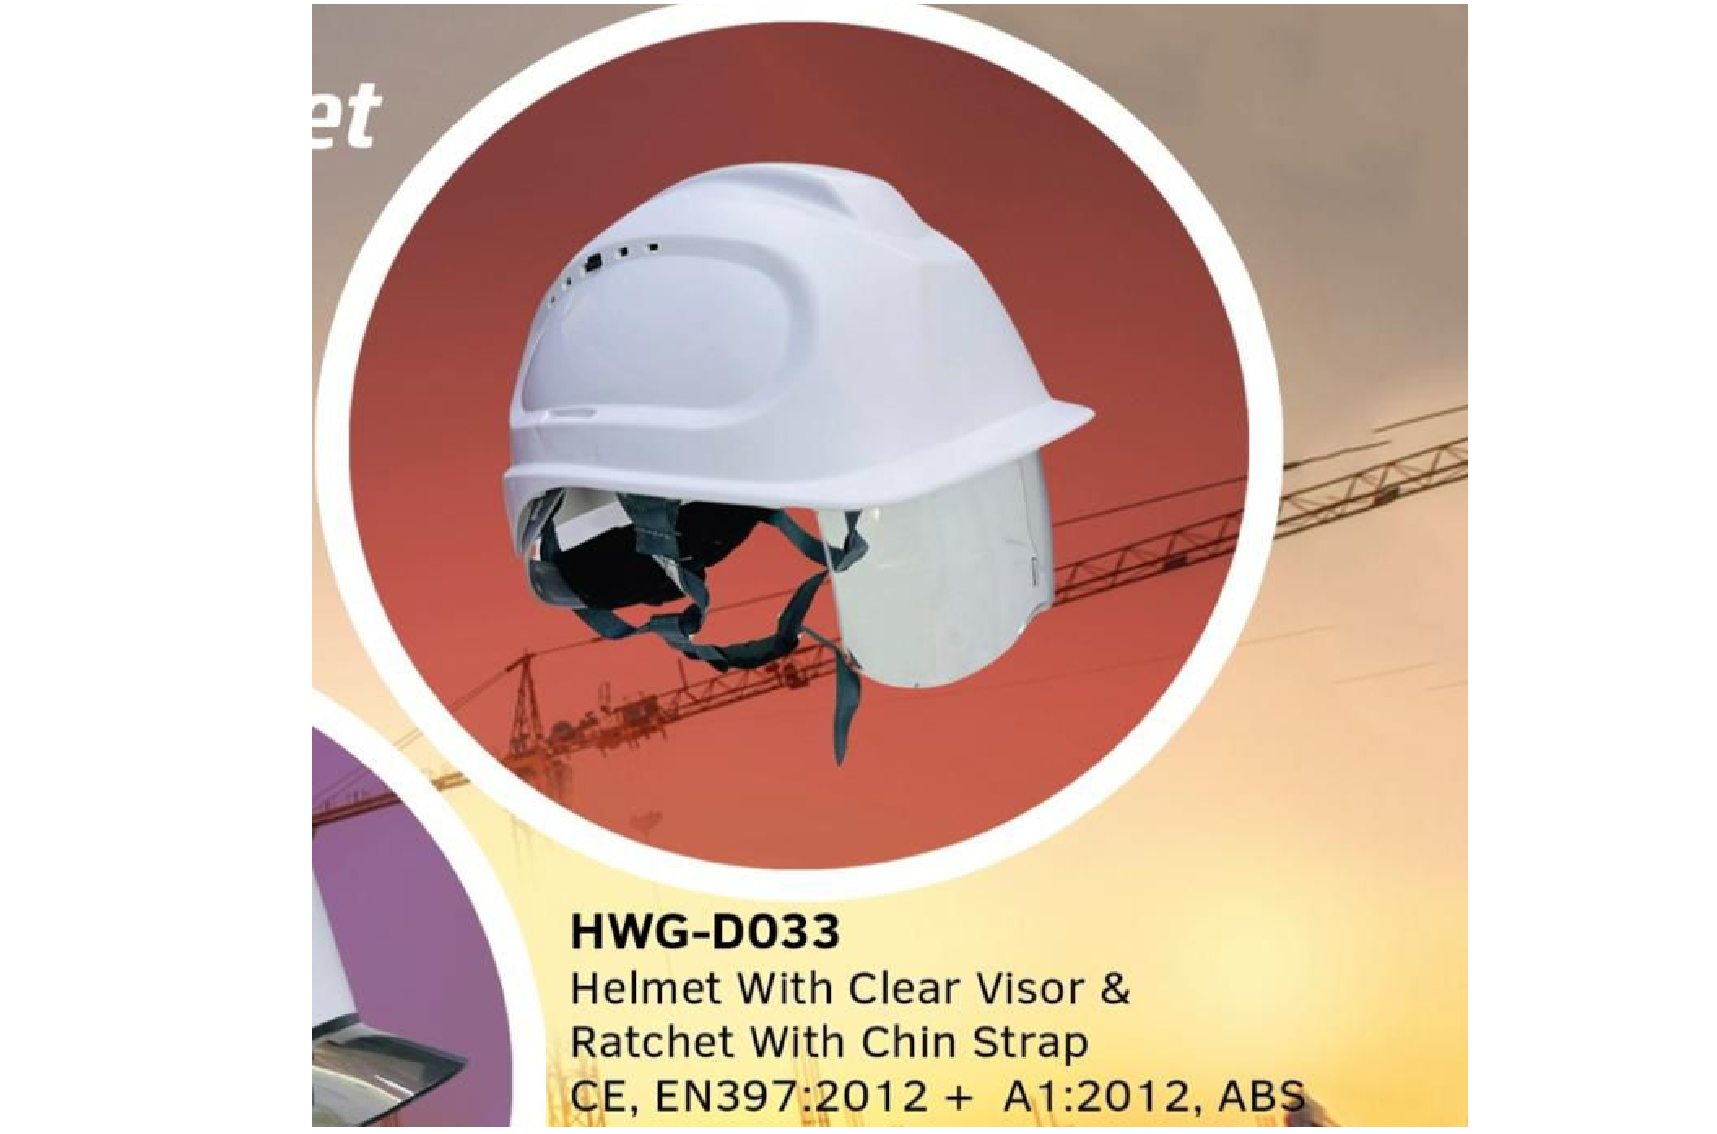 SAFETY HELMET WITH CLEAR VISOR & RATCHET WITH CHIN STRAP ABS